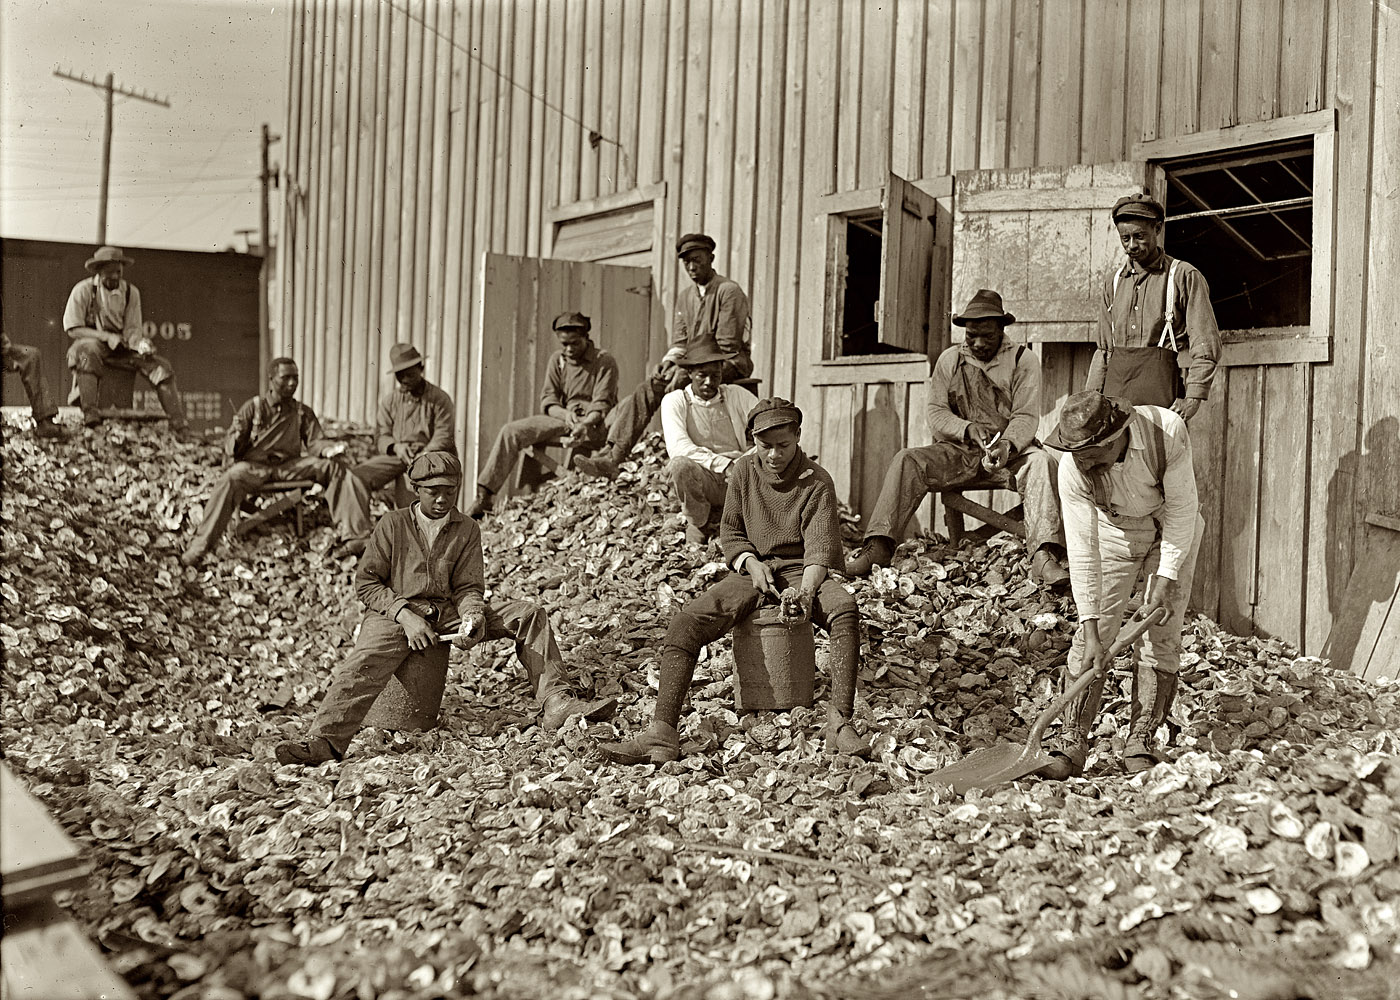 January 1909. "Oyster shuckers at Apalachicola, Florida. This work is carried on by many young boys during busy seasons. This is a dull year so only a few youngsters were in evidence." View full size. Photograph by Lewis Wickes Hine.